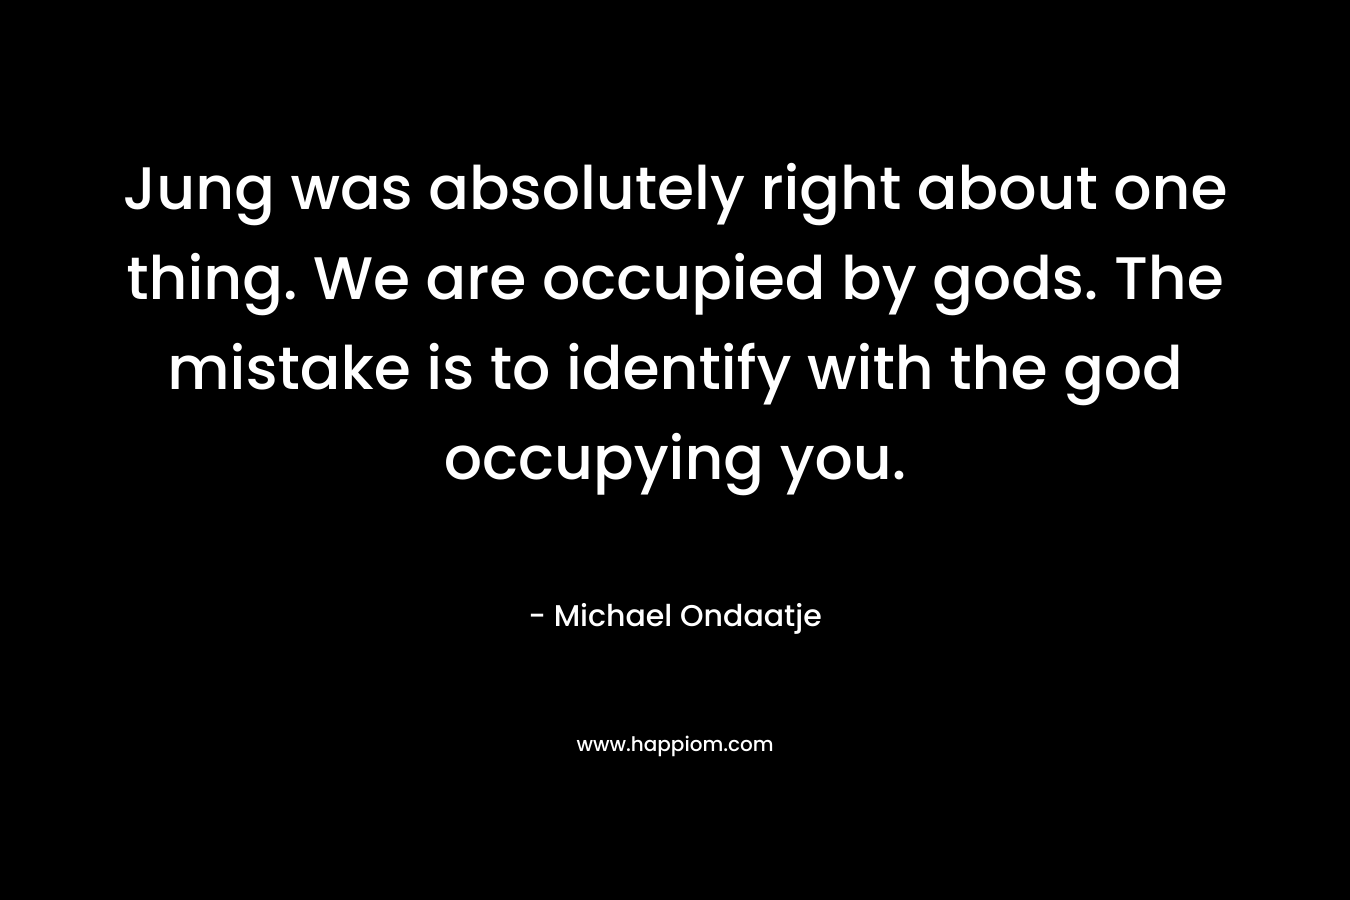 Jung was absolutely right about one thing. We are occupied by gods. The mistake is to identify with the god occupying you. – Michael Ondaatje